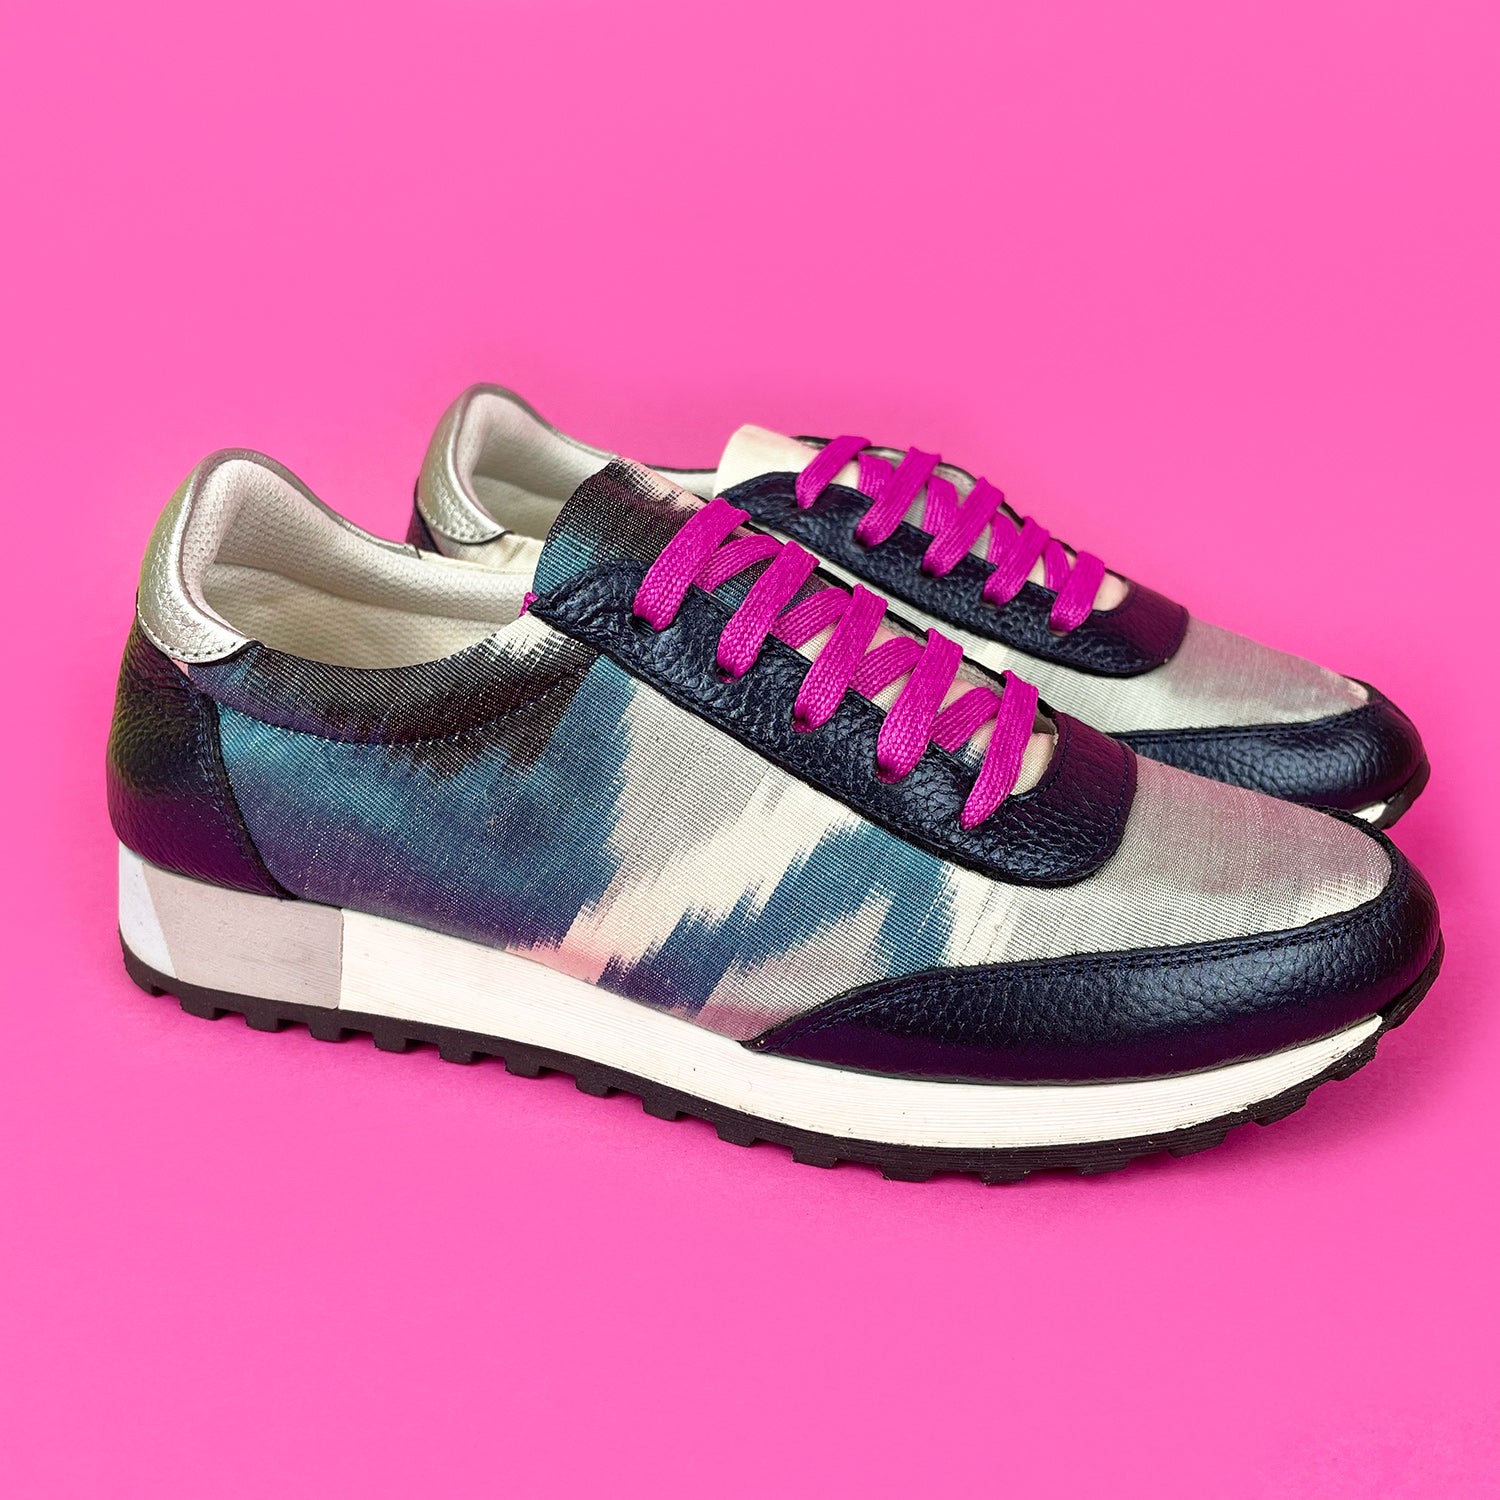 Blue and white Ikat silk trainers with navy metallic leather and cerise pink laces 